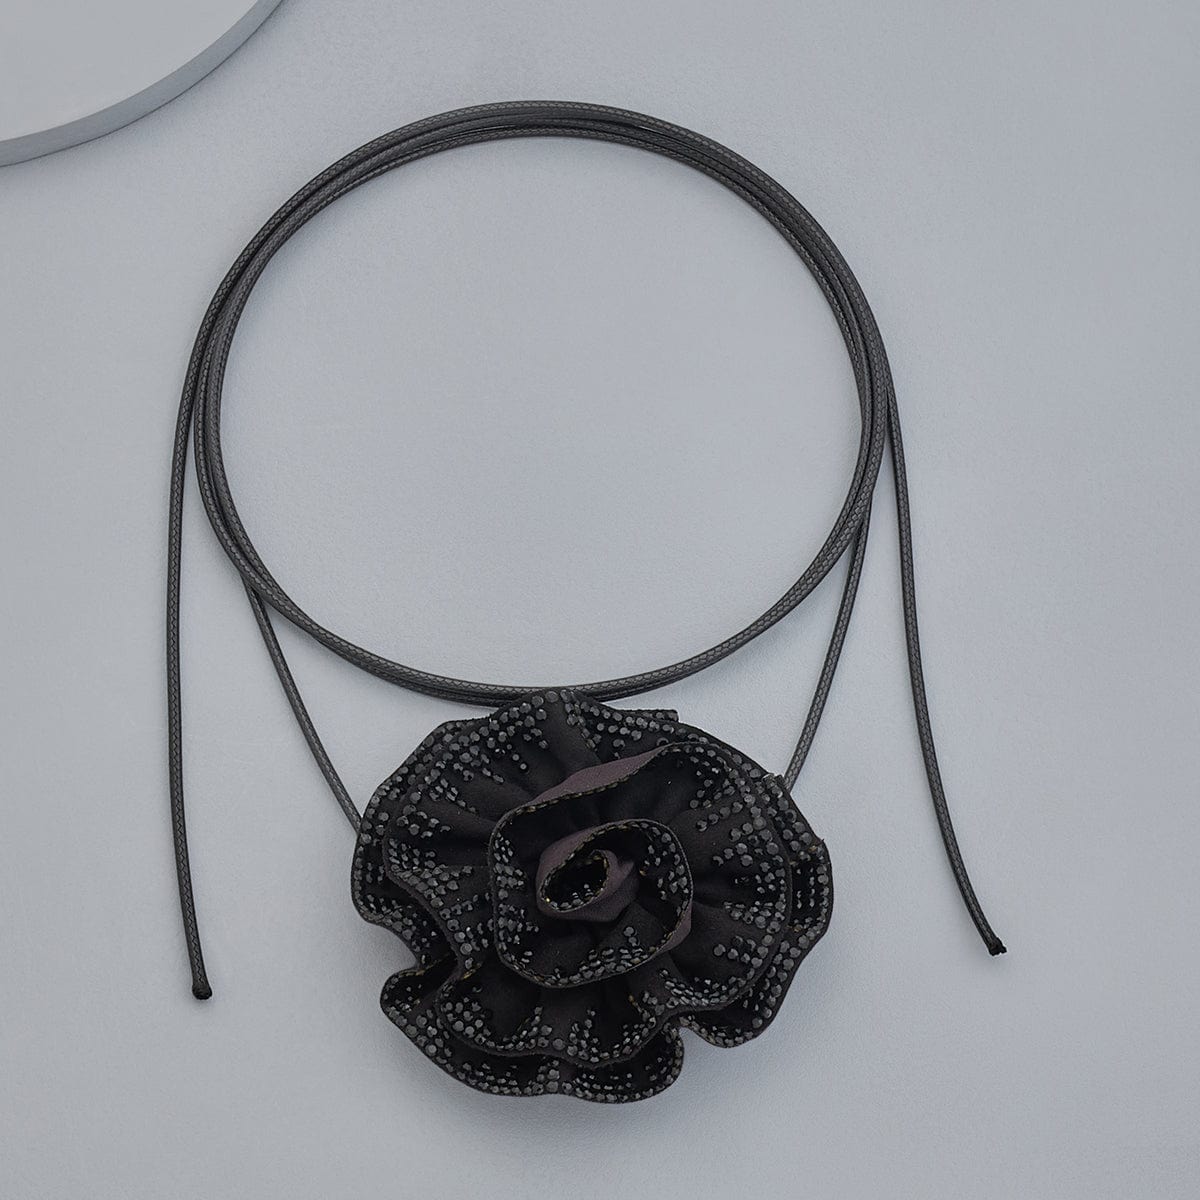 Buy Charming Black Rose Clay Pendant Korean Beads Necklaces at Amazon.in